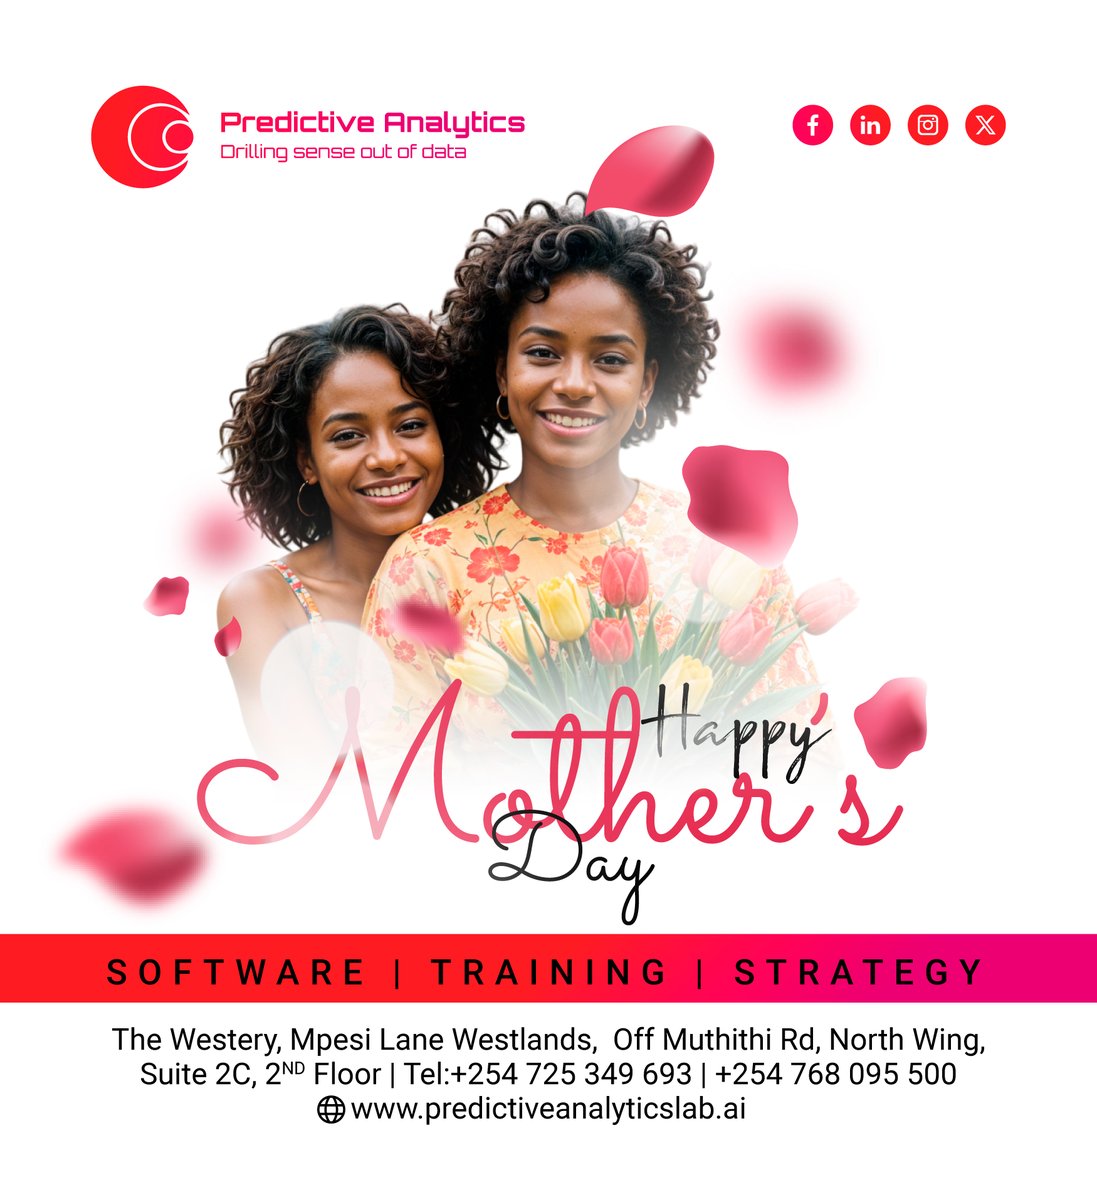 Happy Mother's Day to the incredible women who fill our lives with love🥰, strength, and boundless support.🌺
And don't forget to check our offers on this mother's day.

#mothersday #predictiveanalytics #dataanalysis